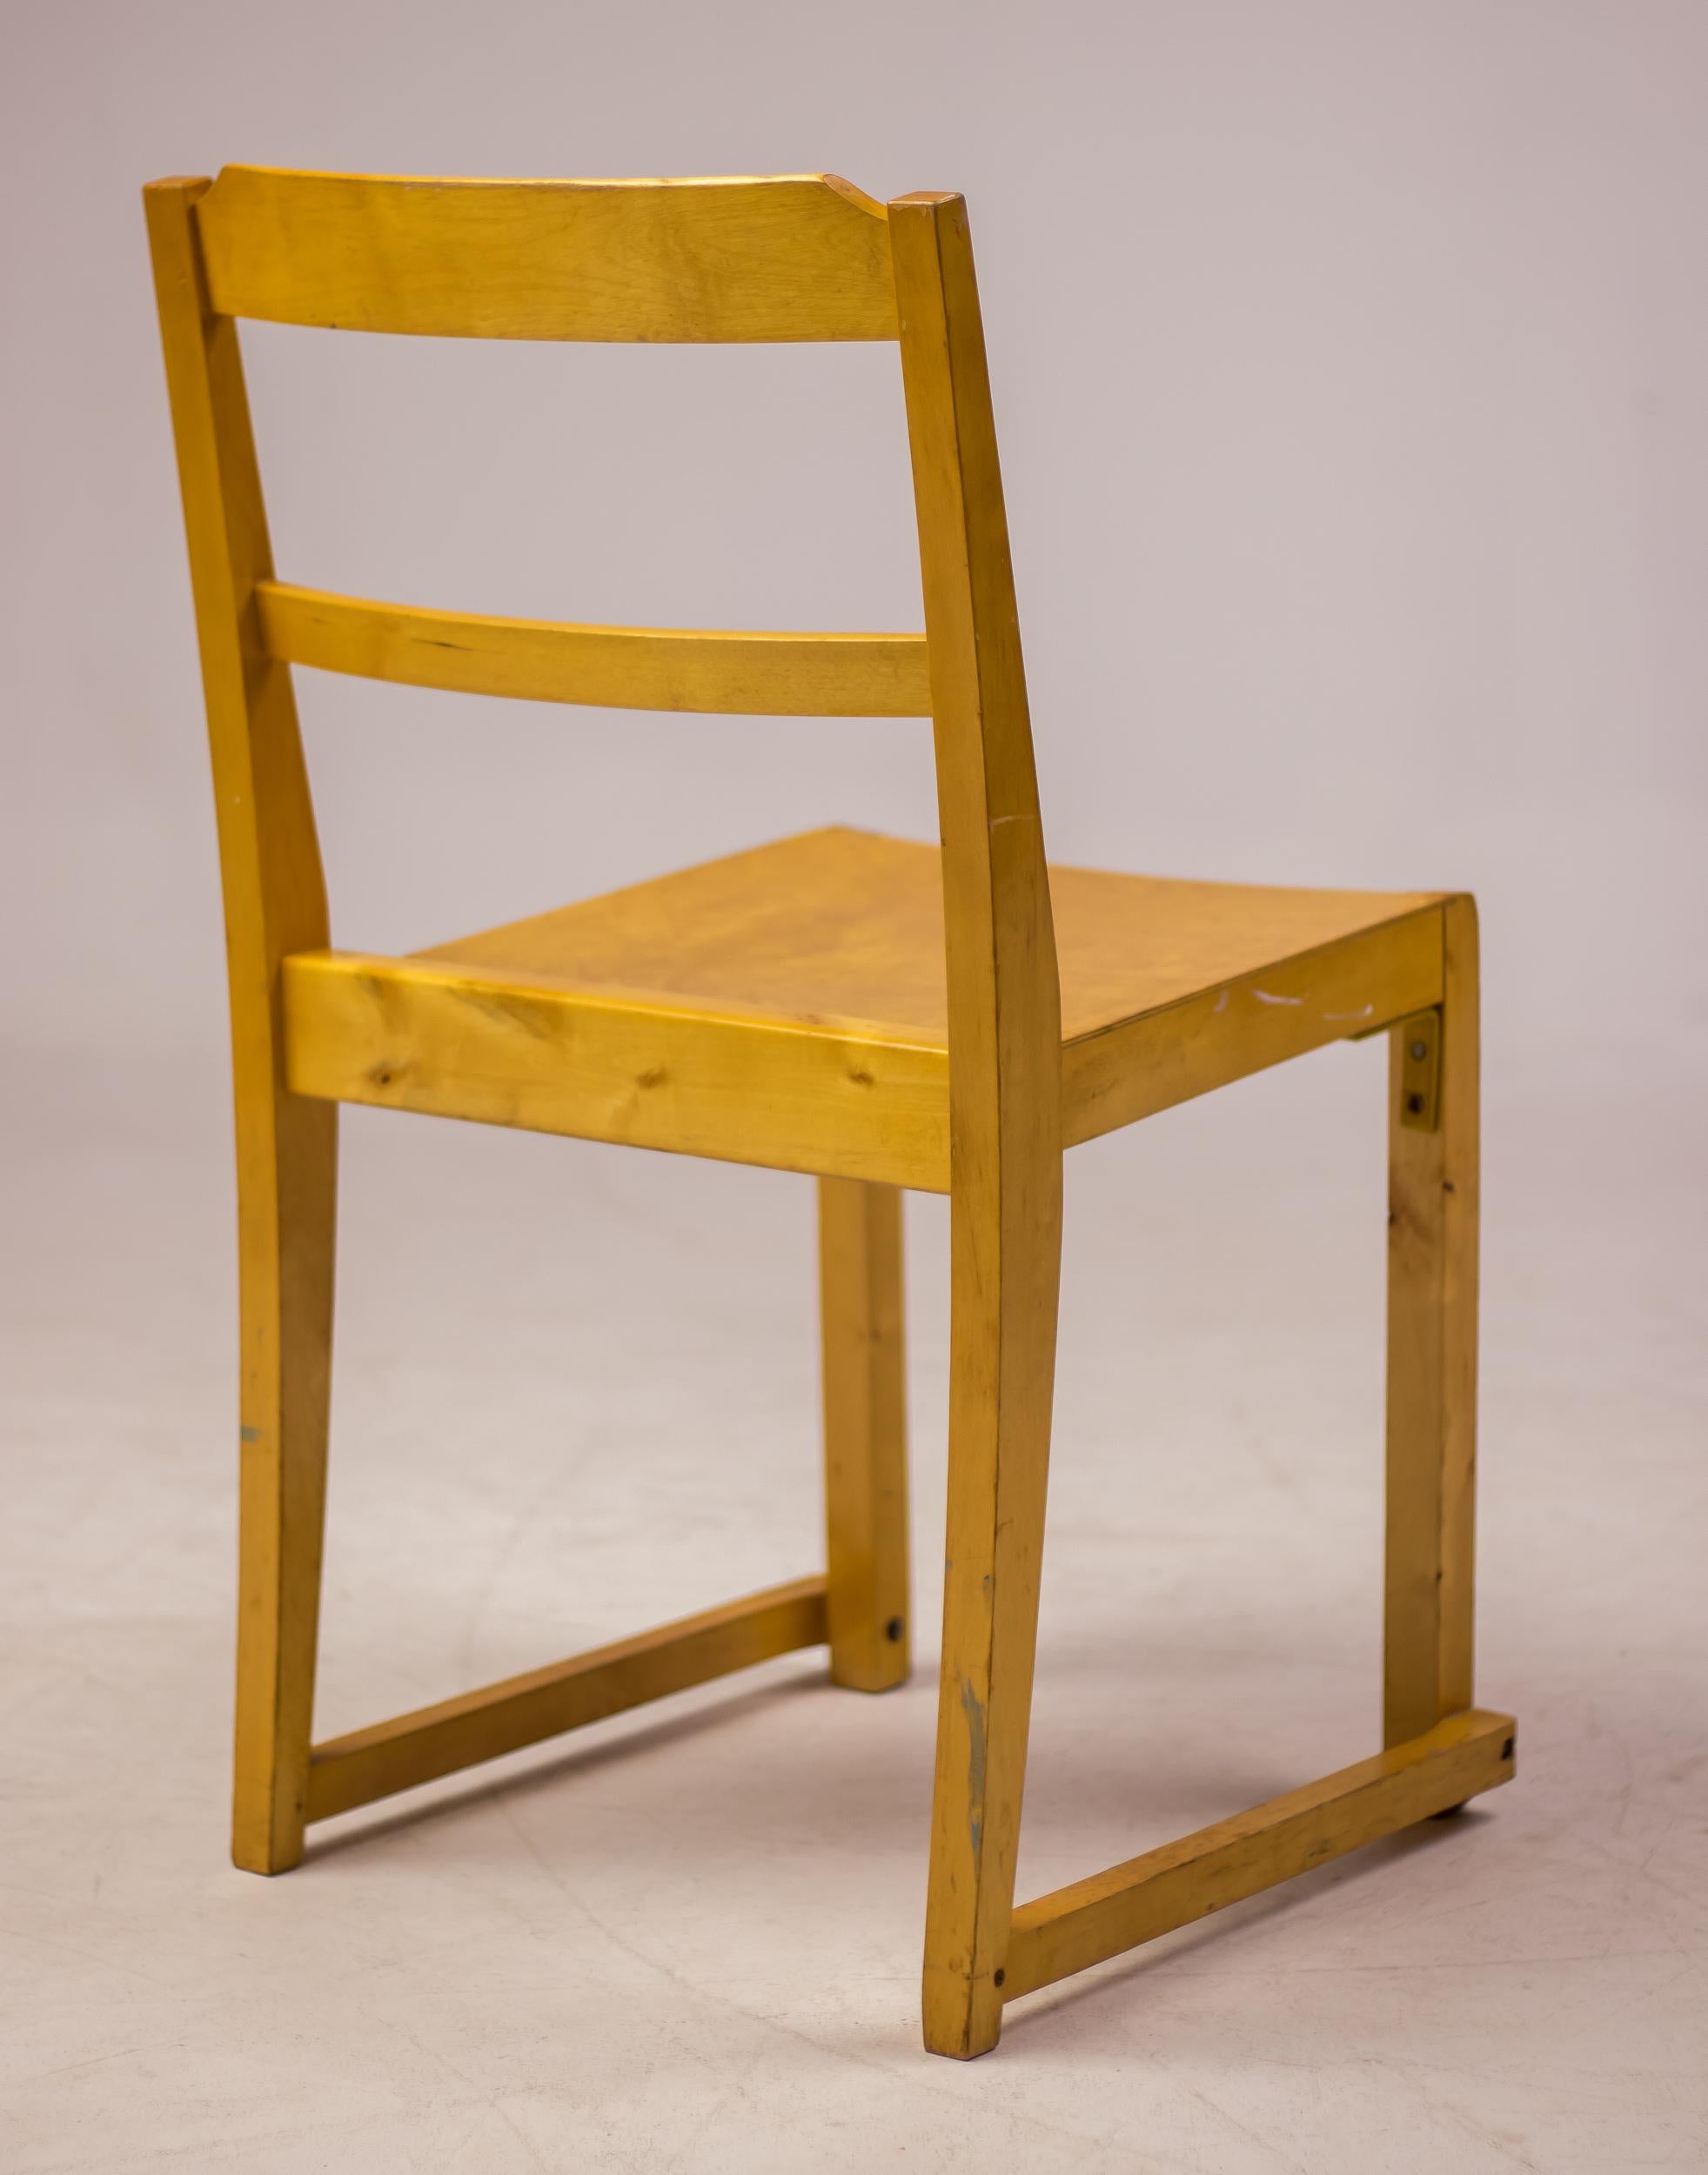 Set of six stacking chairs in birch designed by the Swedish architect Sven Markelius.
Manufactured by Bodafors for the Helsingborg Concert Hall in 1932.
A landmark of Swedish architecture by Sven Markelius.
Rare lightweight chairs, easily